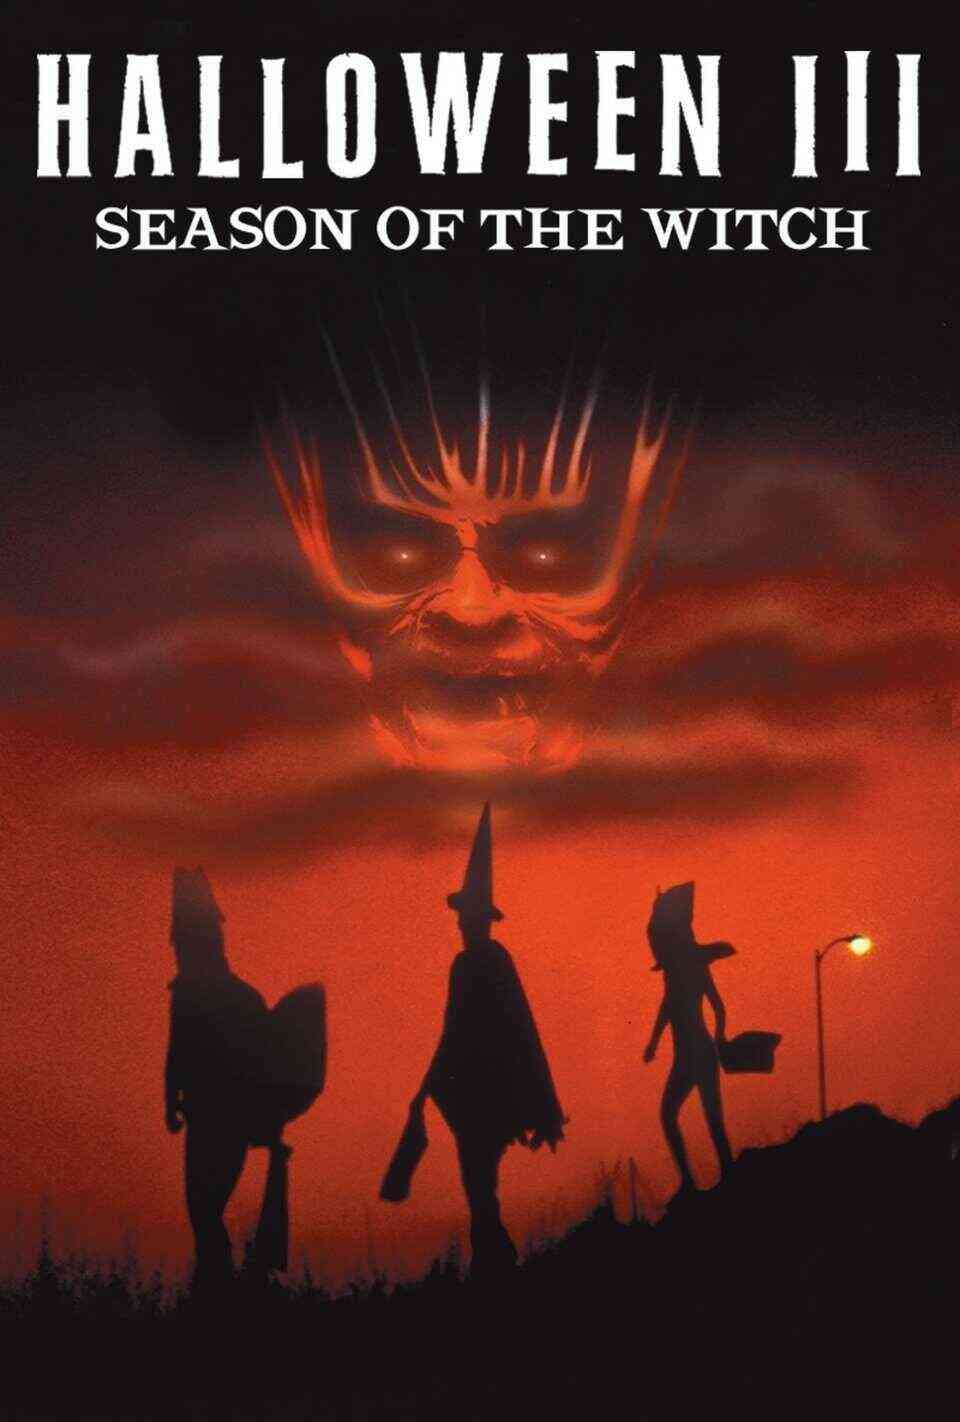 Read Season of the Witch screenplay (poster)